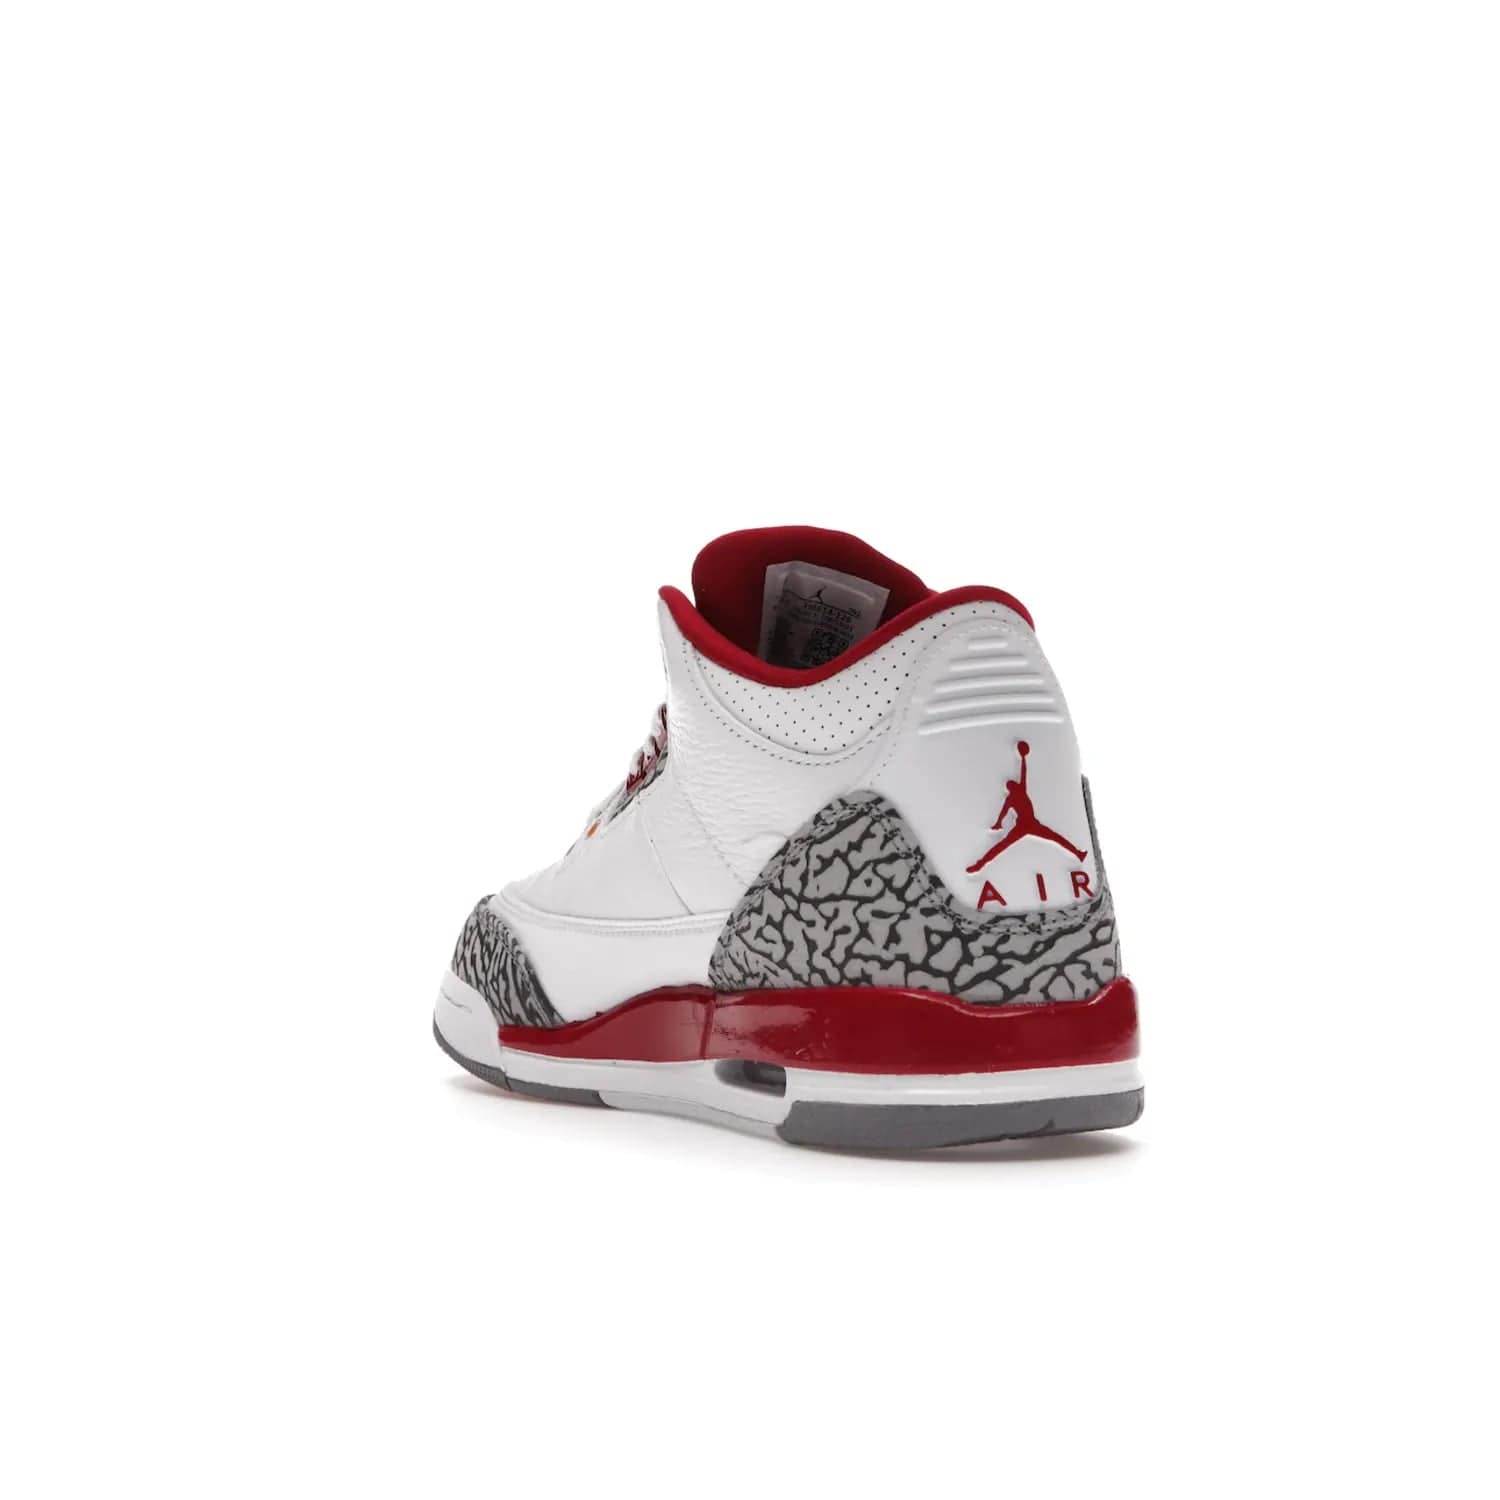 Jordan 3 Retro Cardinal (GS) - Image 25 - Only at www.BallersClubKickz.com - Shop the kid-sized Air Jordan 3 Retro Cardinal GS, released Feb 2022. White tumbled leather upper, light curry accenting, cement grey and classic red details throughout. Visible Air cushioning, midsole, and an eye-catching outsole. Show off your style with this fashionable streetwear silhouette.